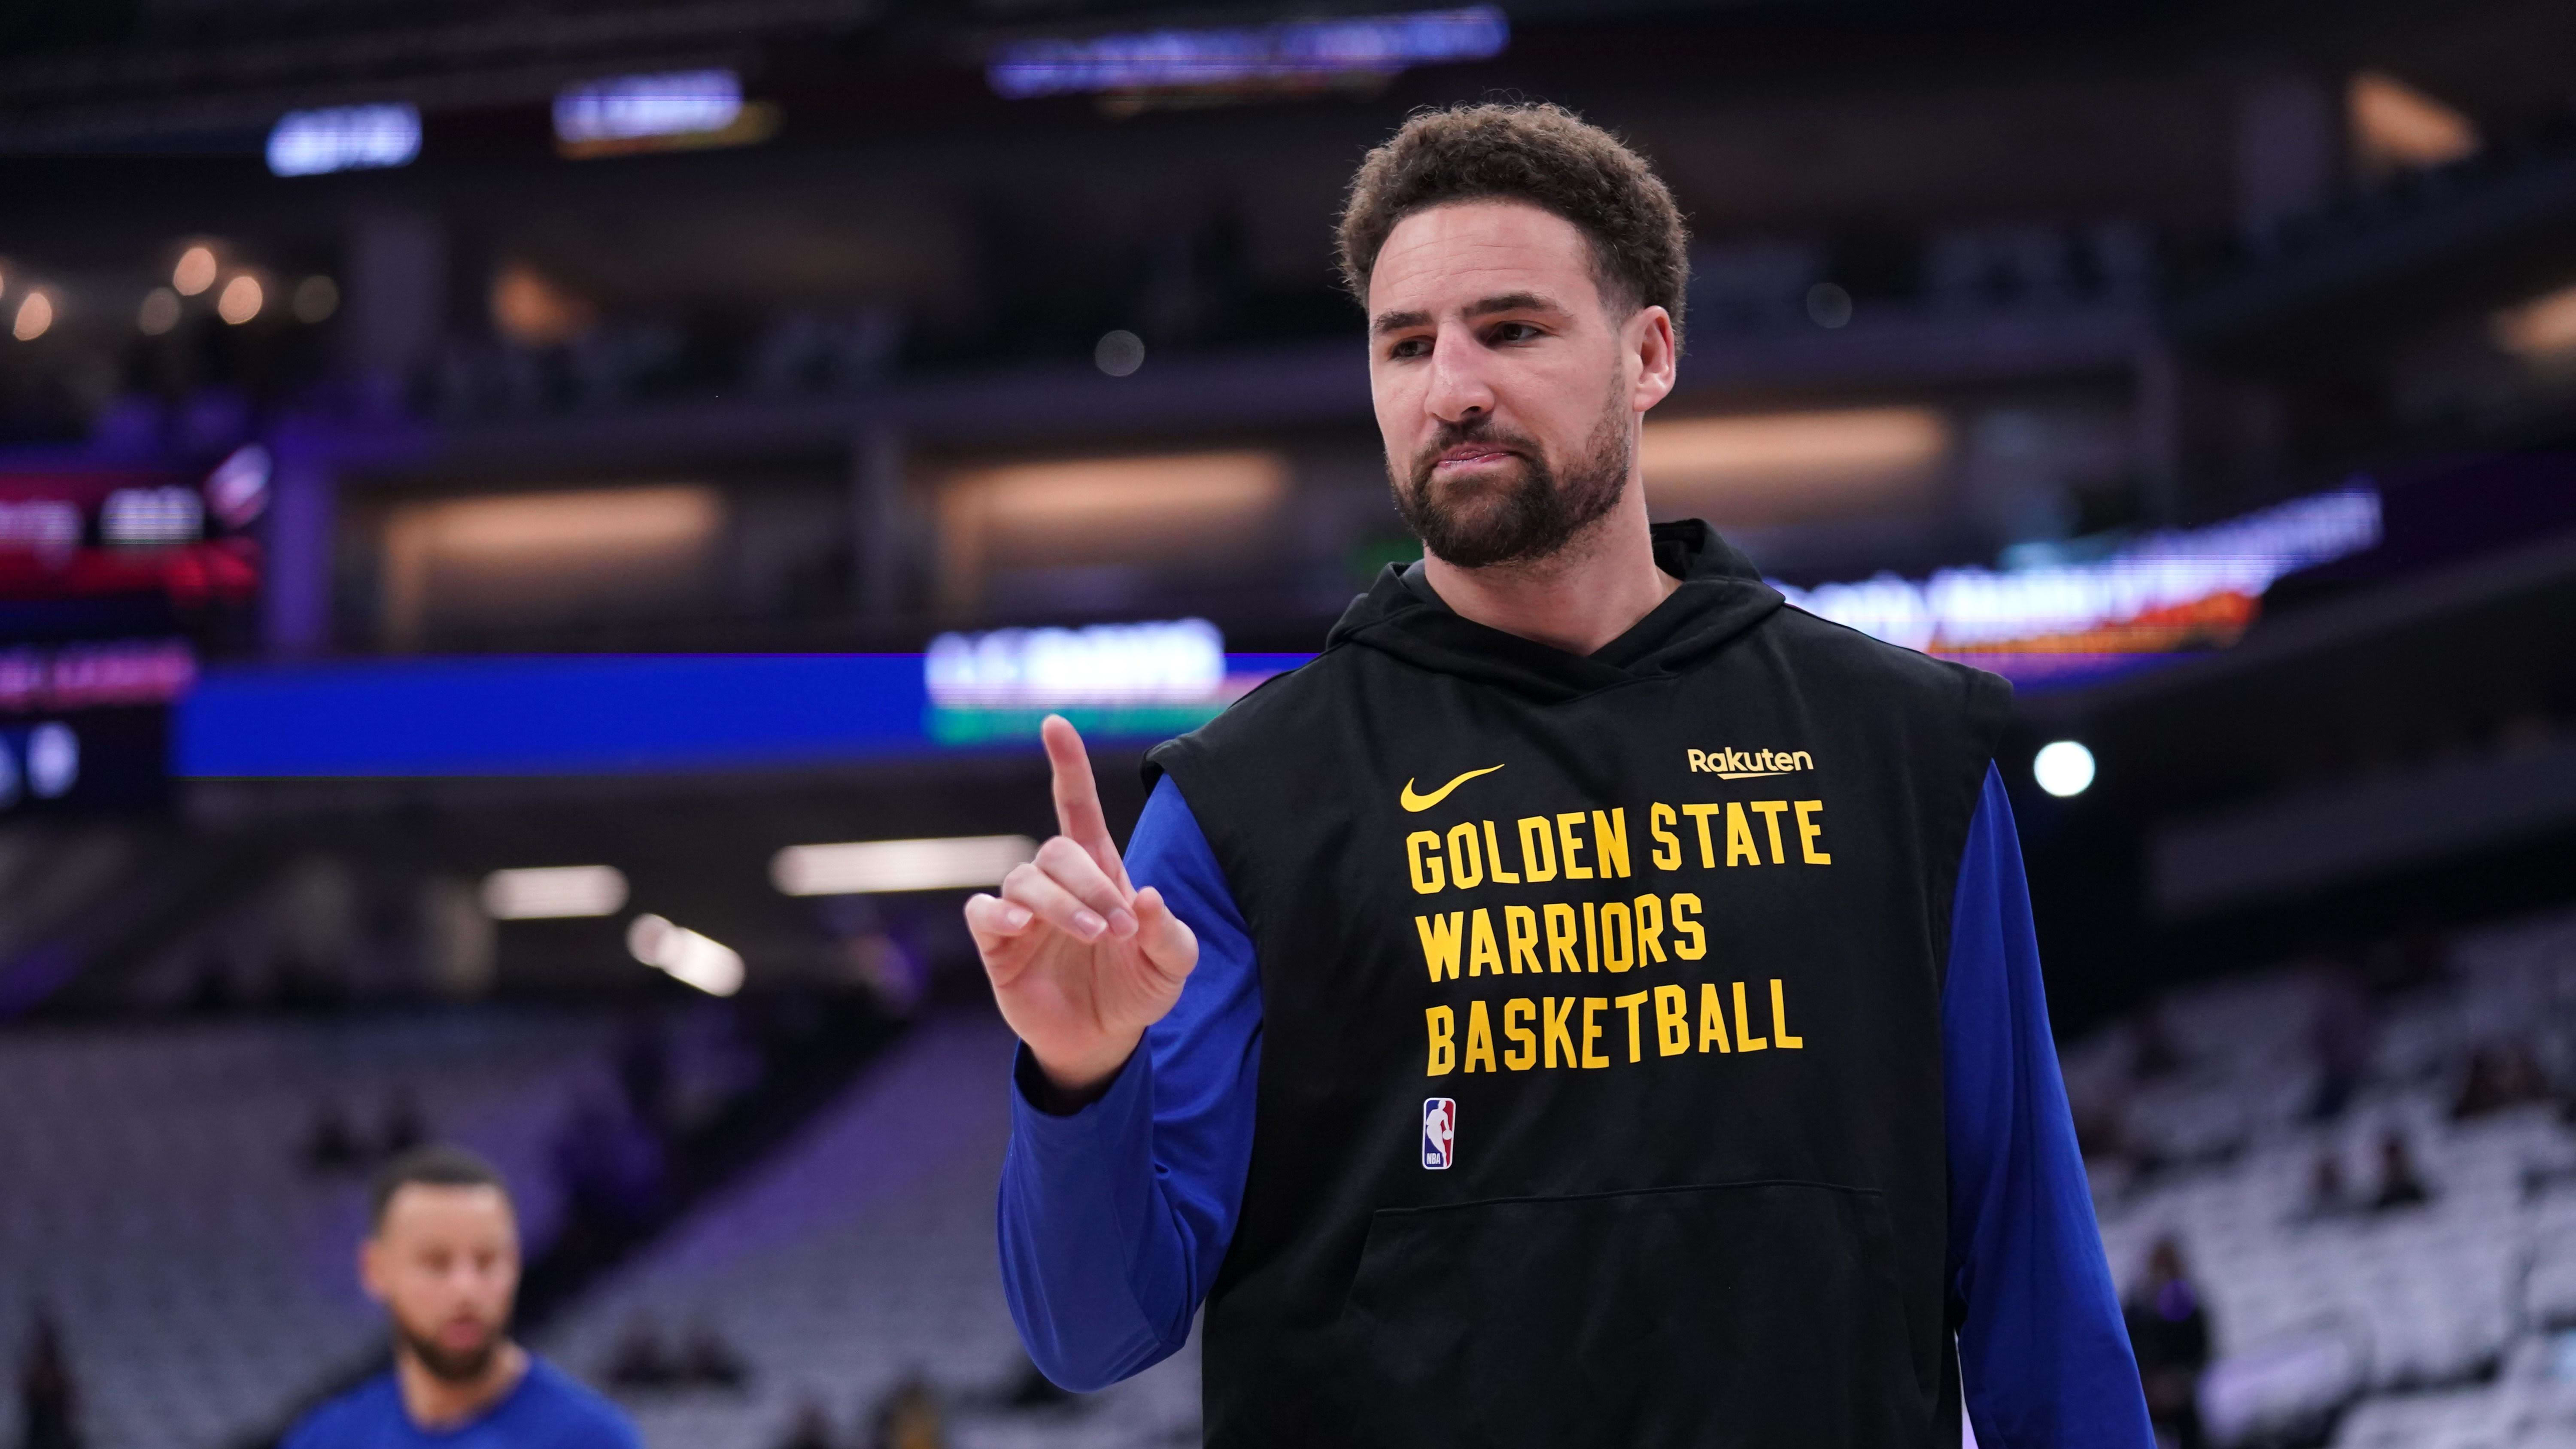 Former NBA Player Reacts to Shocking Team Pursuing Klay Thompson